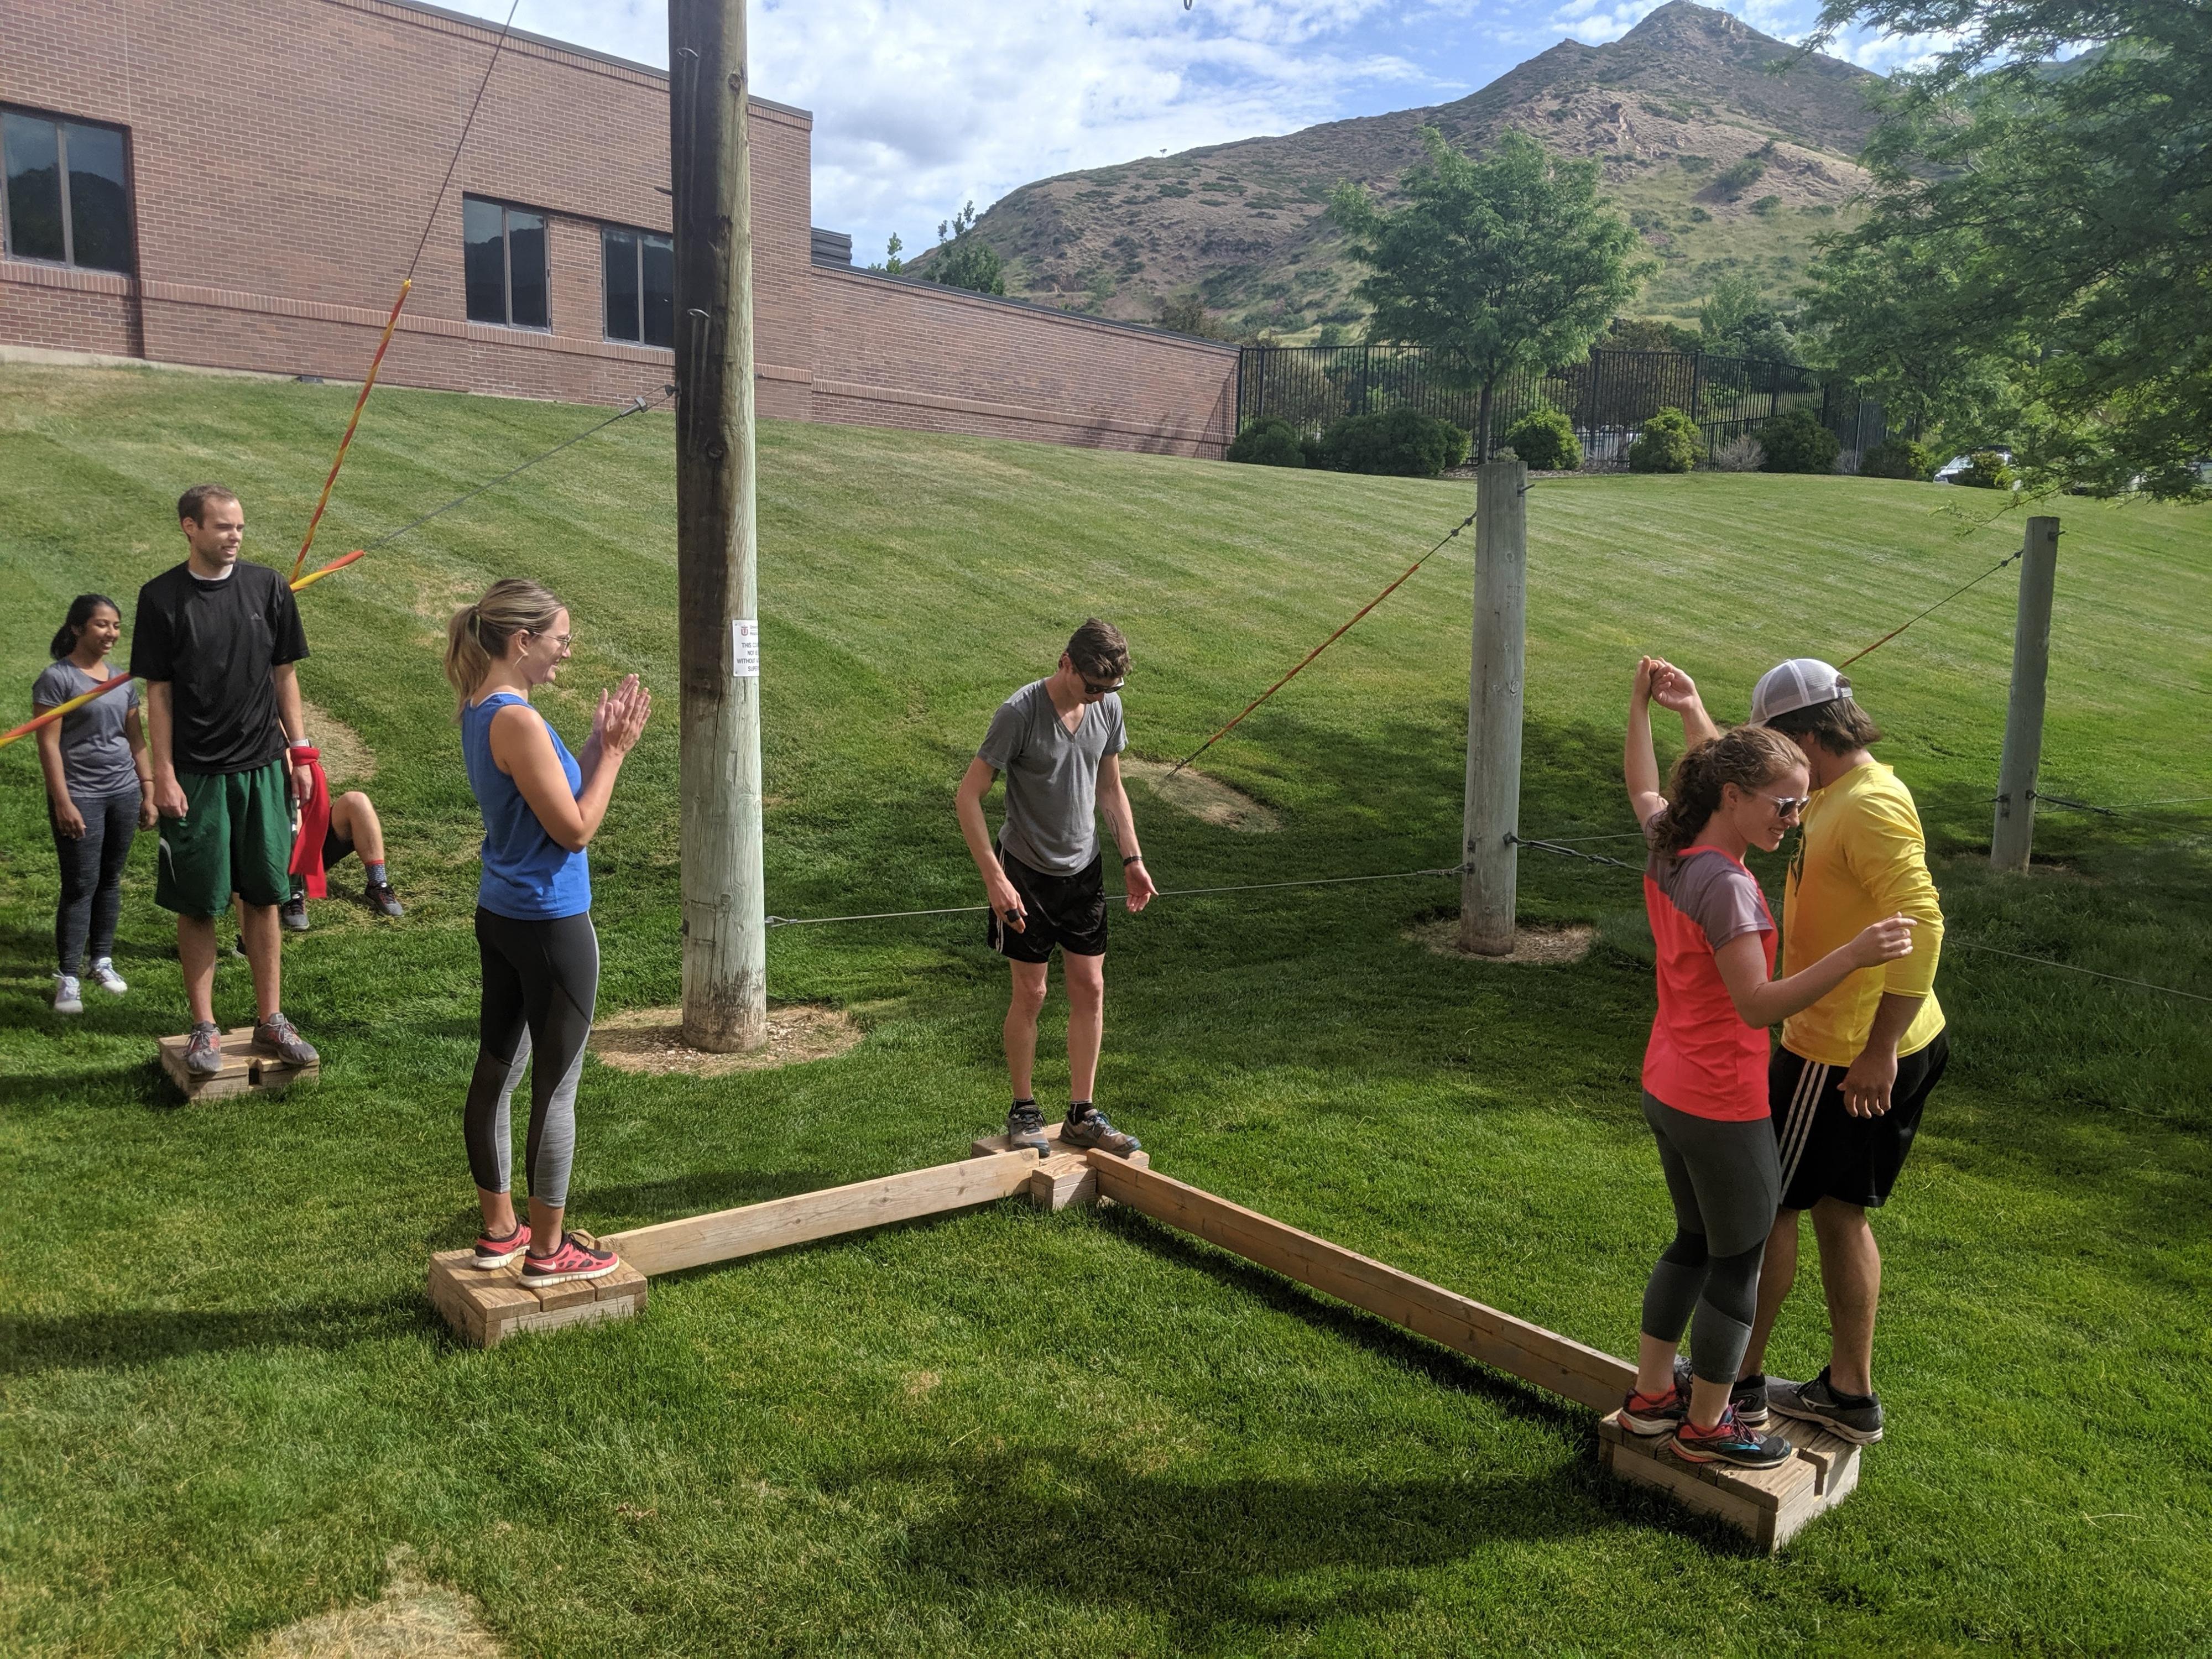 Group of people working as a team to climb through a low ropes course challenge